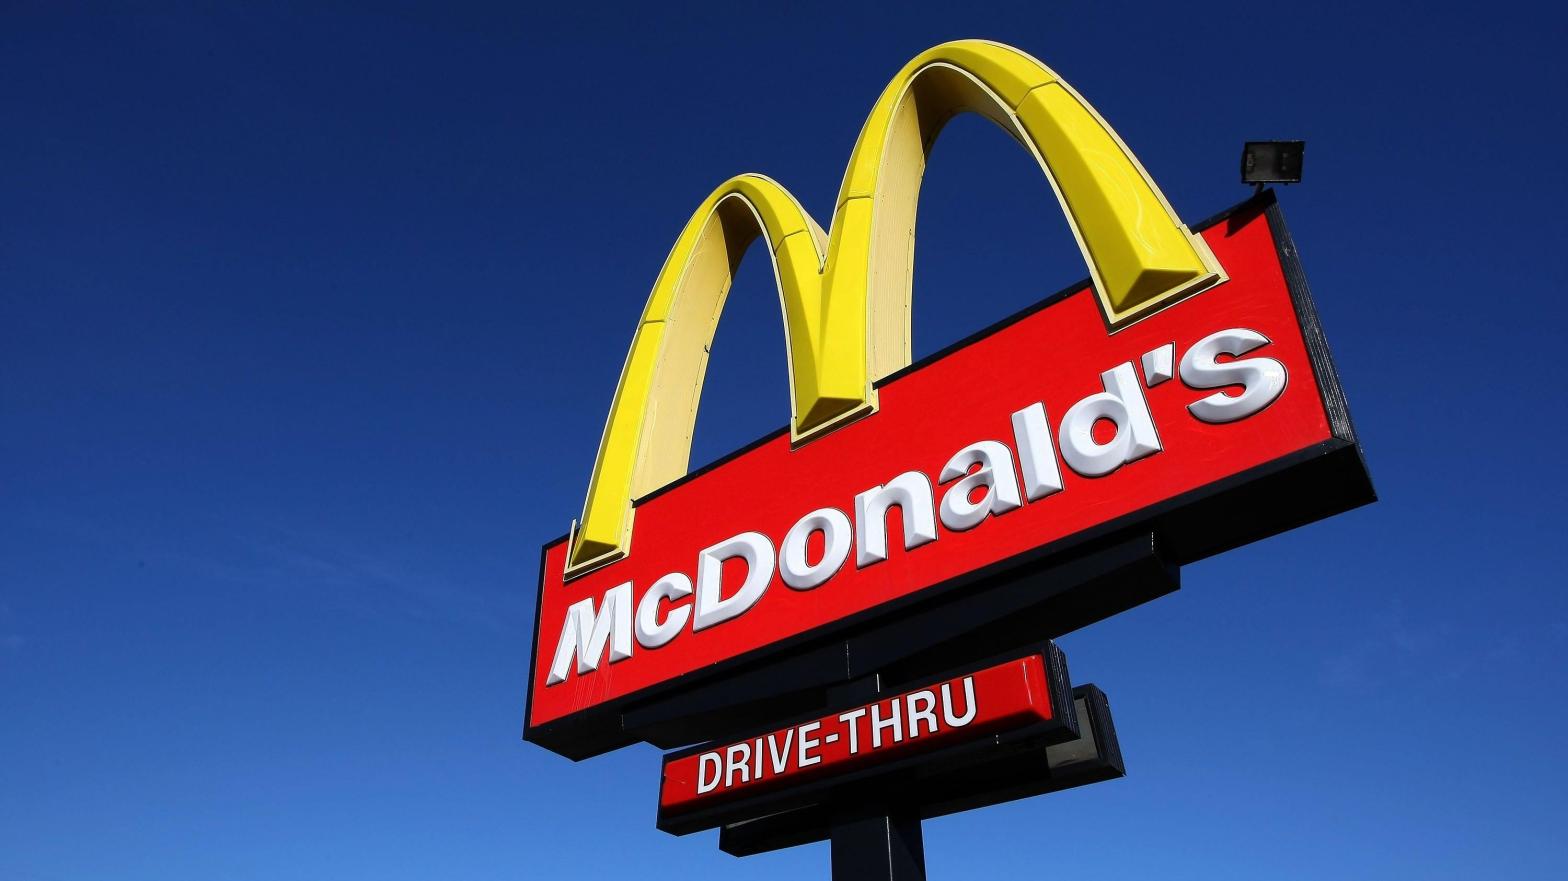 During its trial run of the AI drive-thrus, McDonald's reportedly missed its goal of 95% order accuracy by over 10%. (Image: Justin Sullivan, Getty Images)